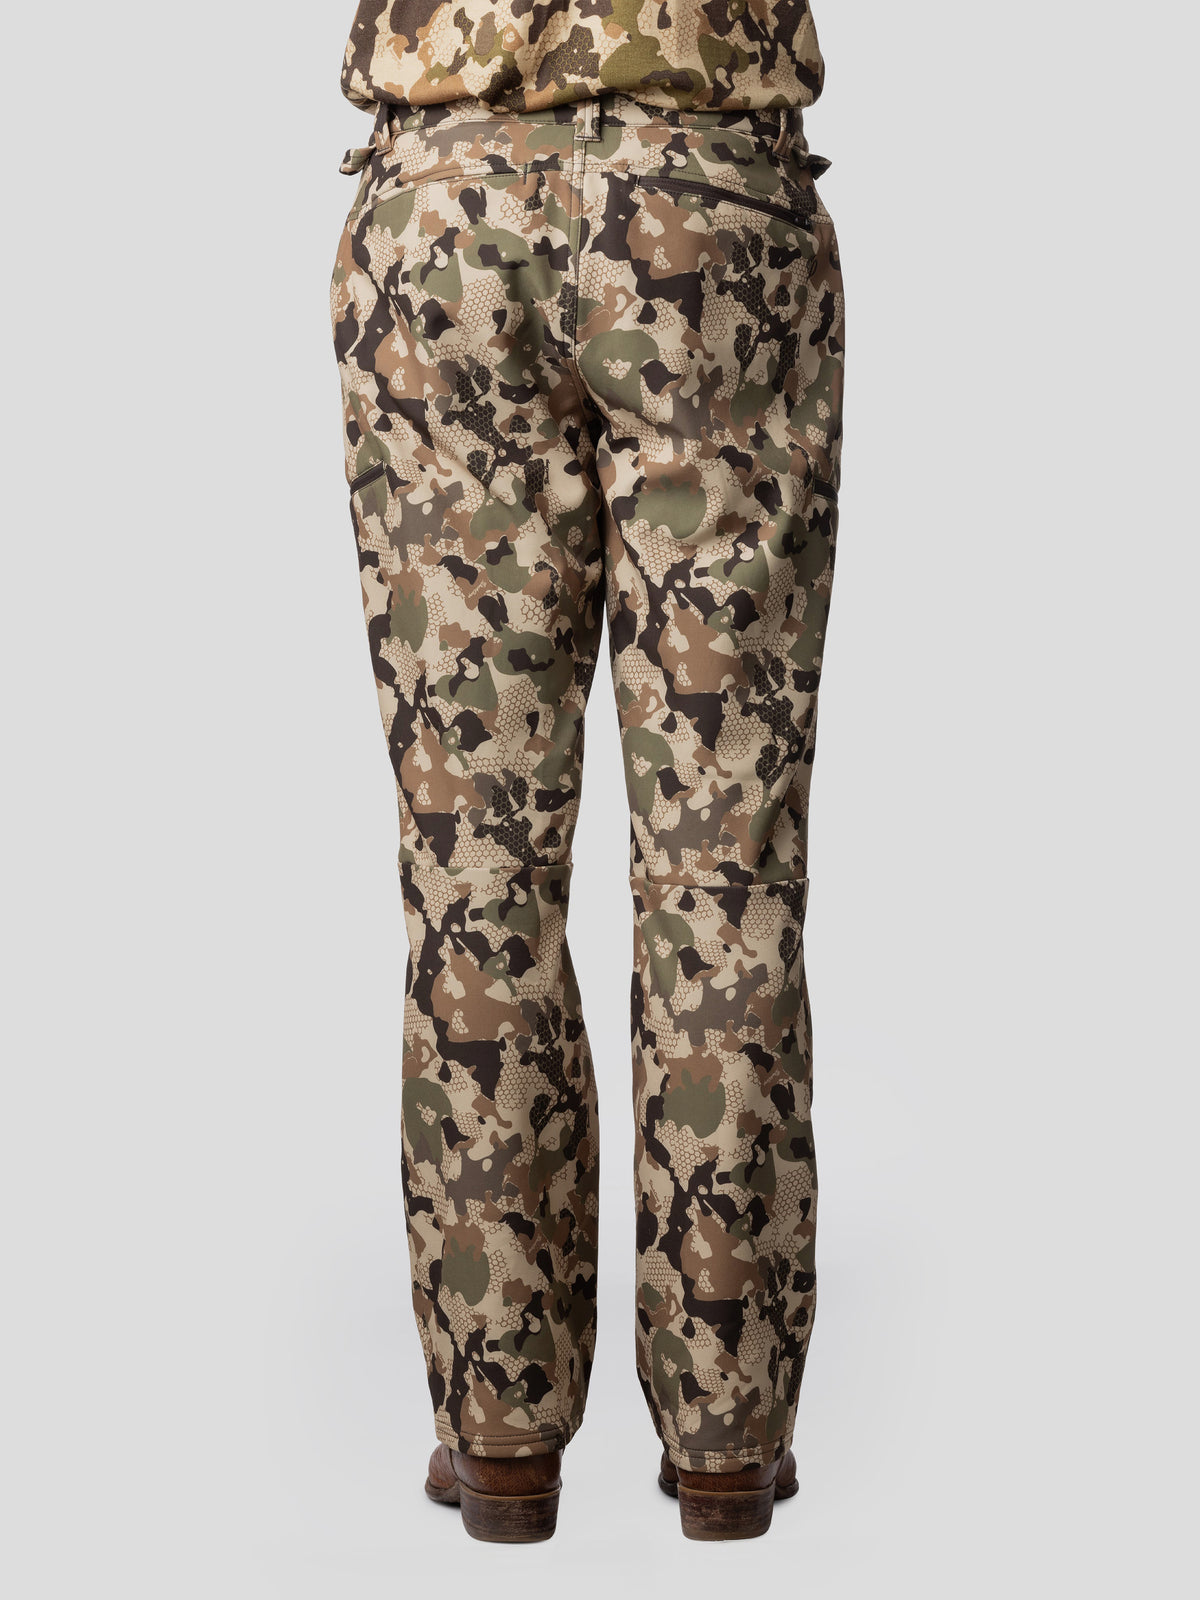 Contact Softshell Pant - Wetland Camouflage